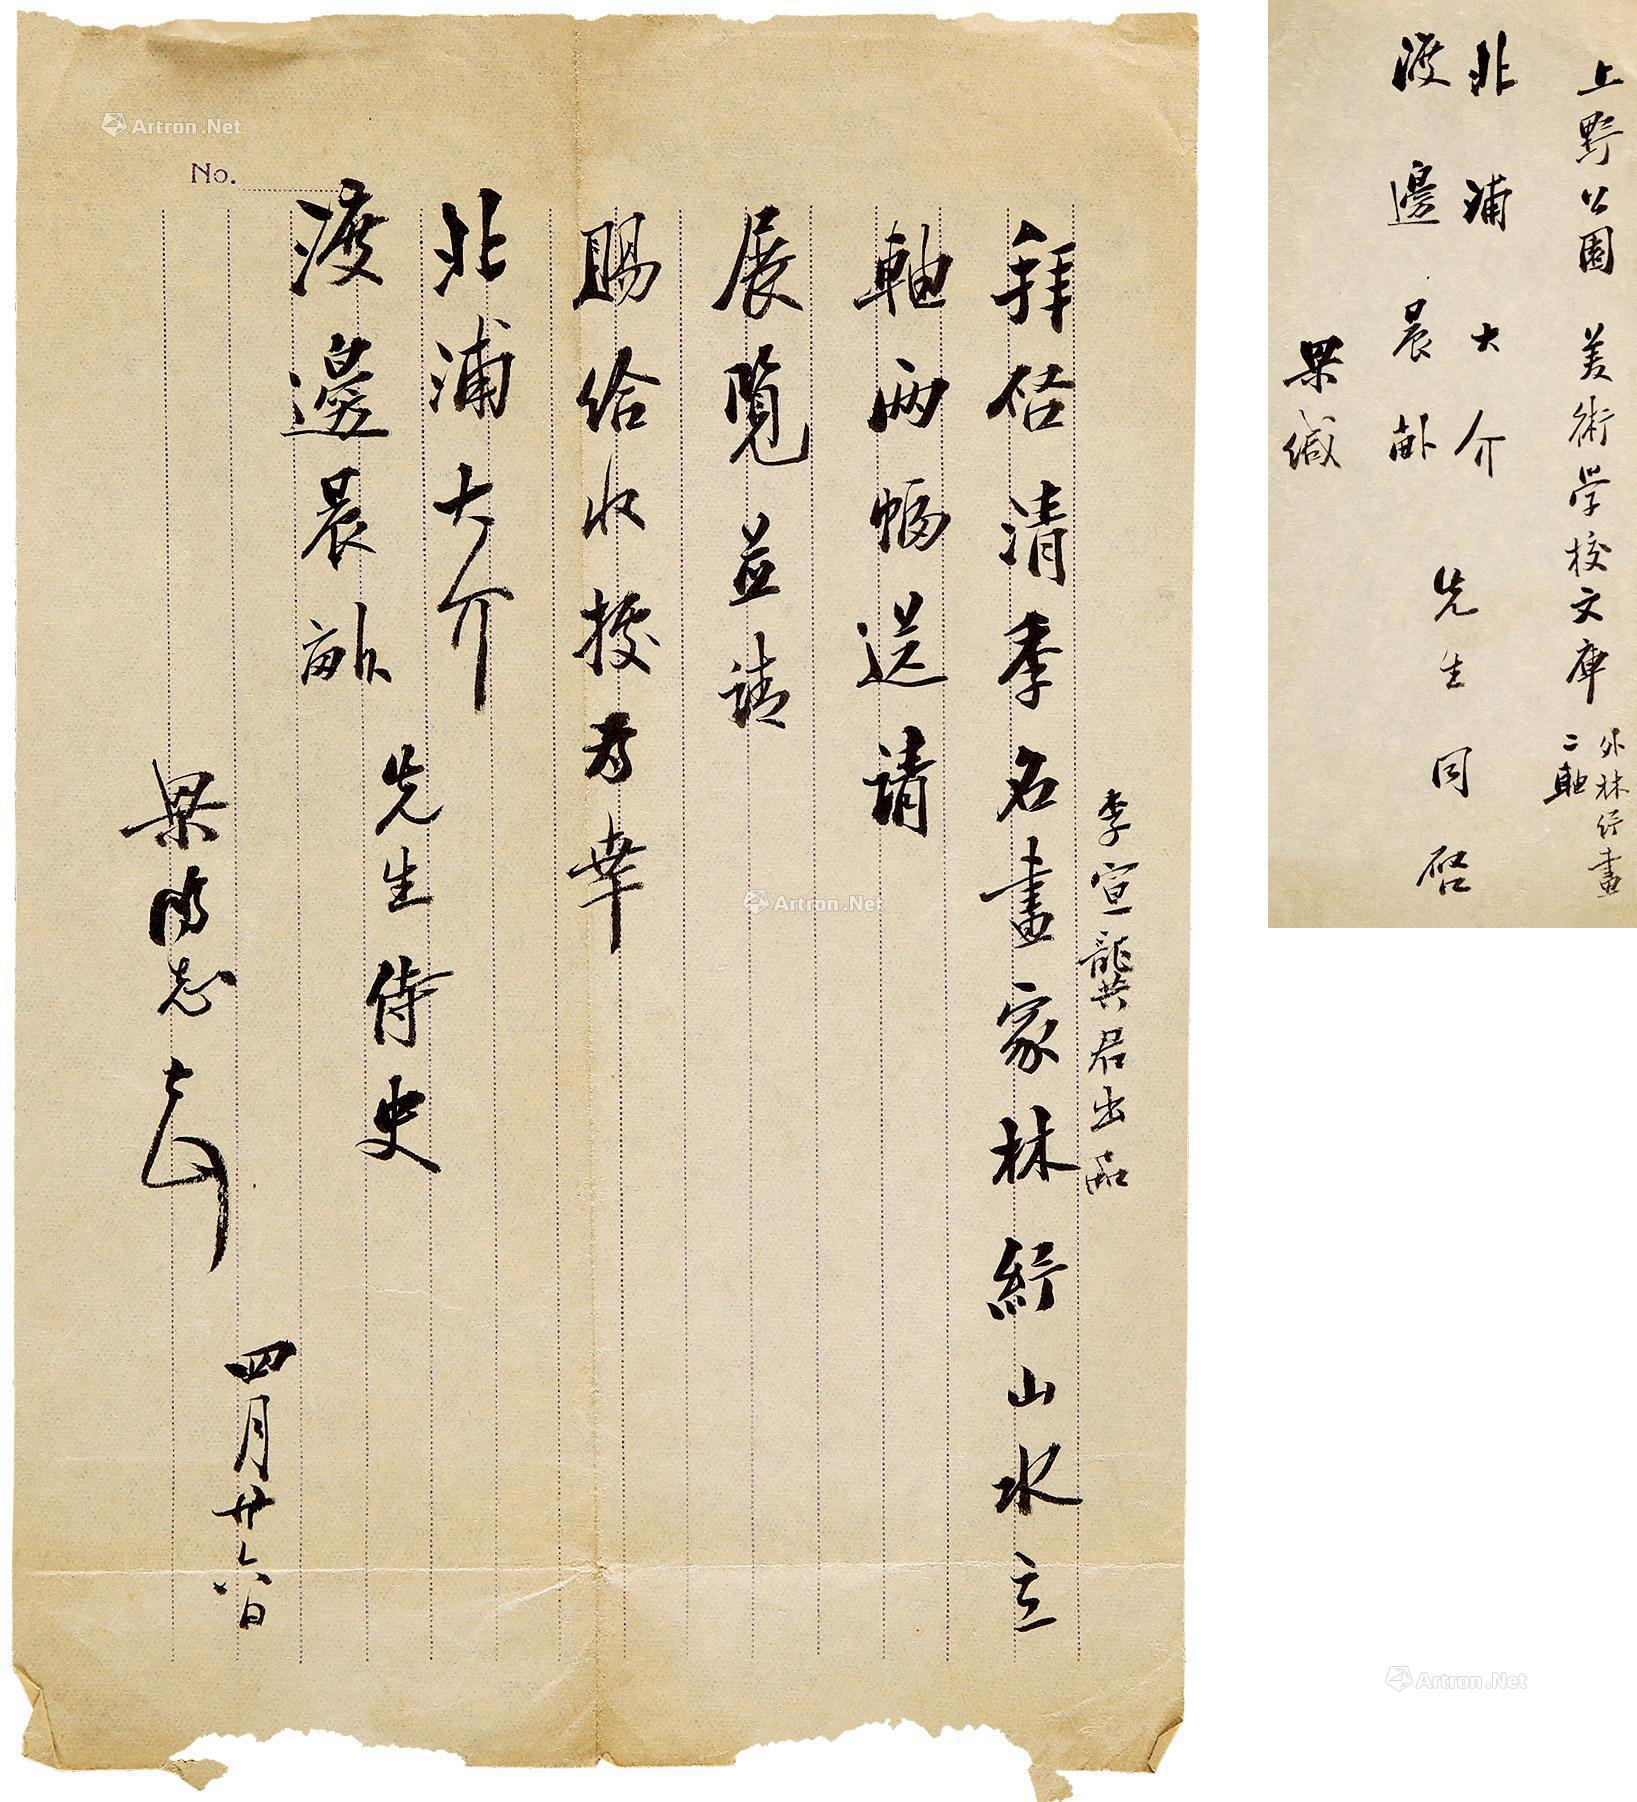 One letter of Liang Hongzhi， with original cover